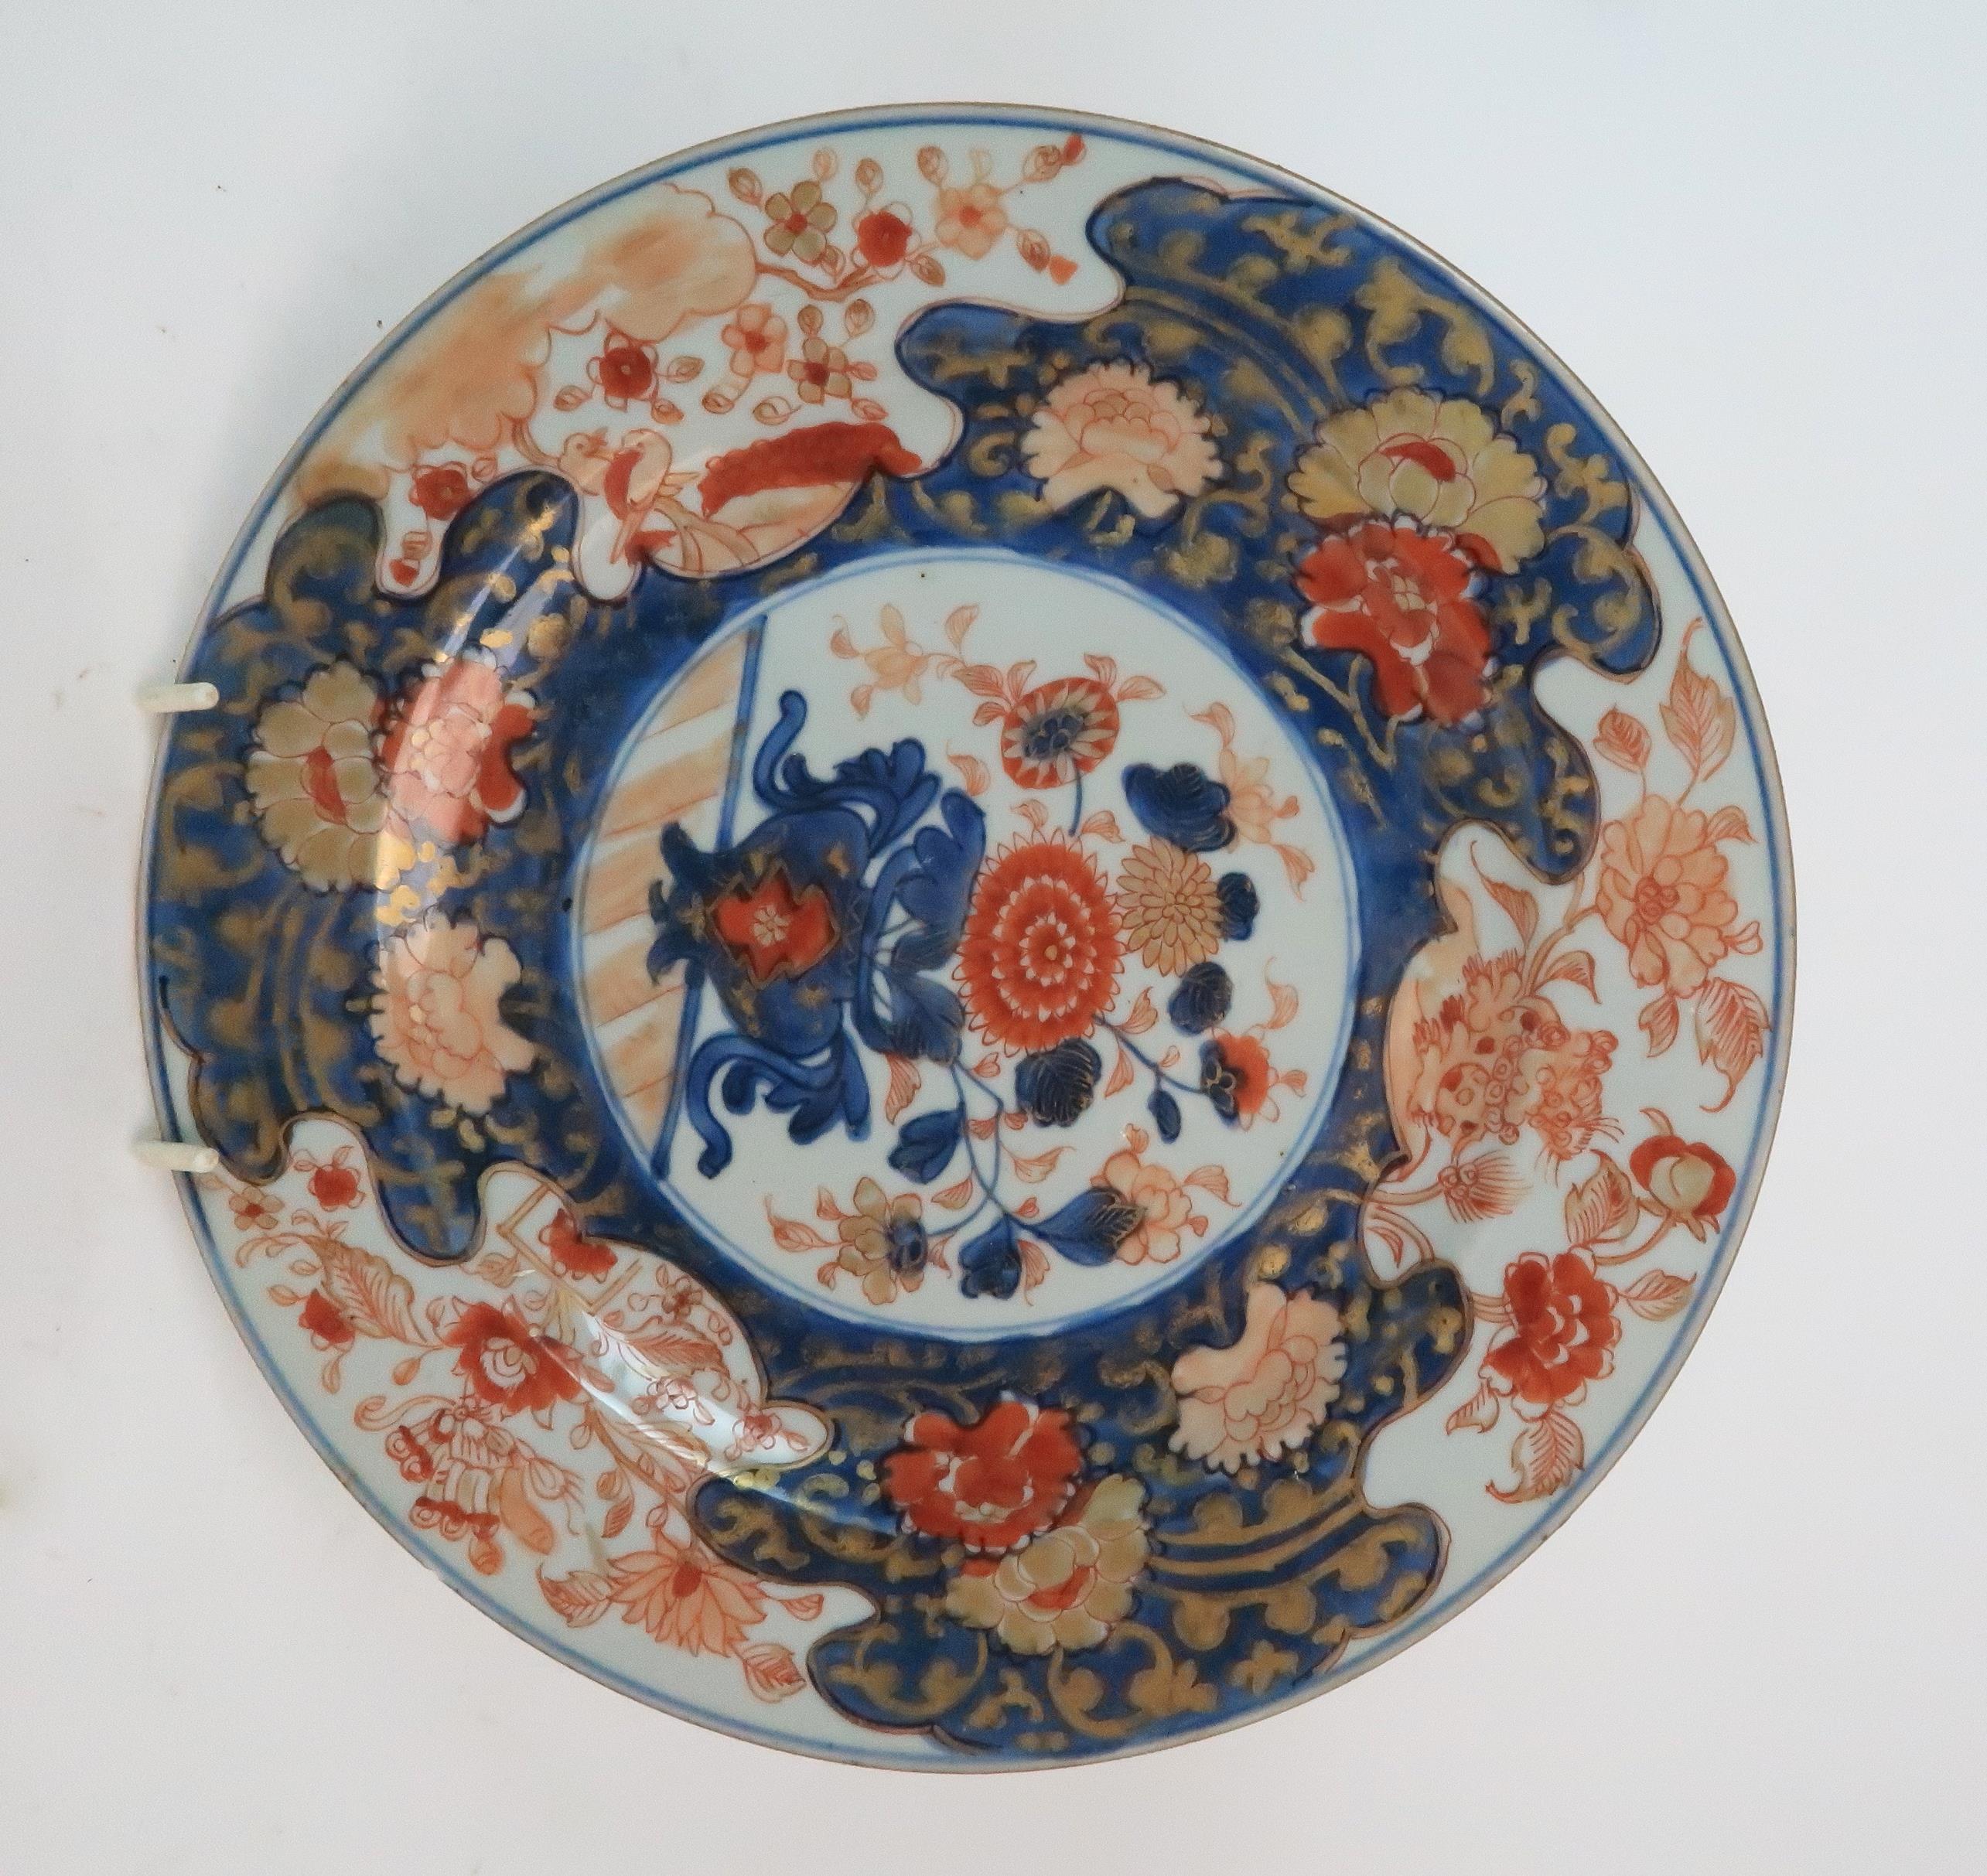 THREE CHINESE EXPORT IMARI PATTERN PLATES painted with vases of flowers and a landscape, 23 and 23. - Image 4 of 16